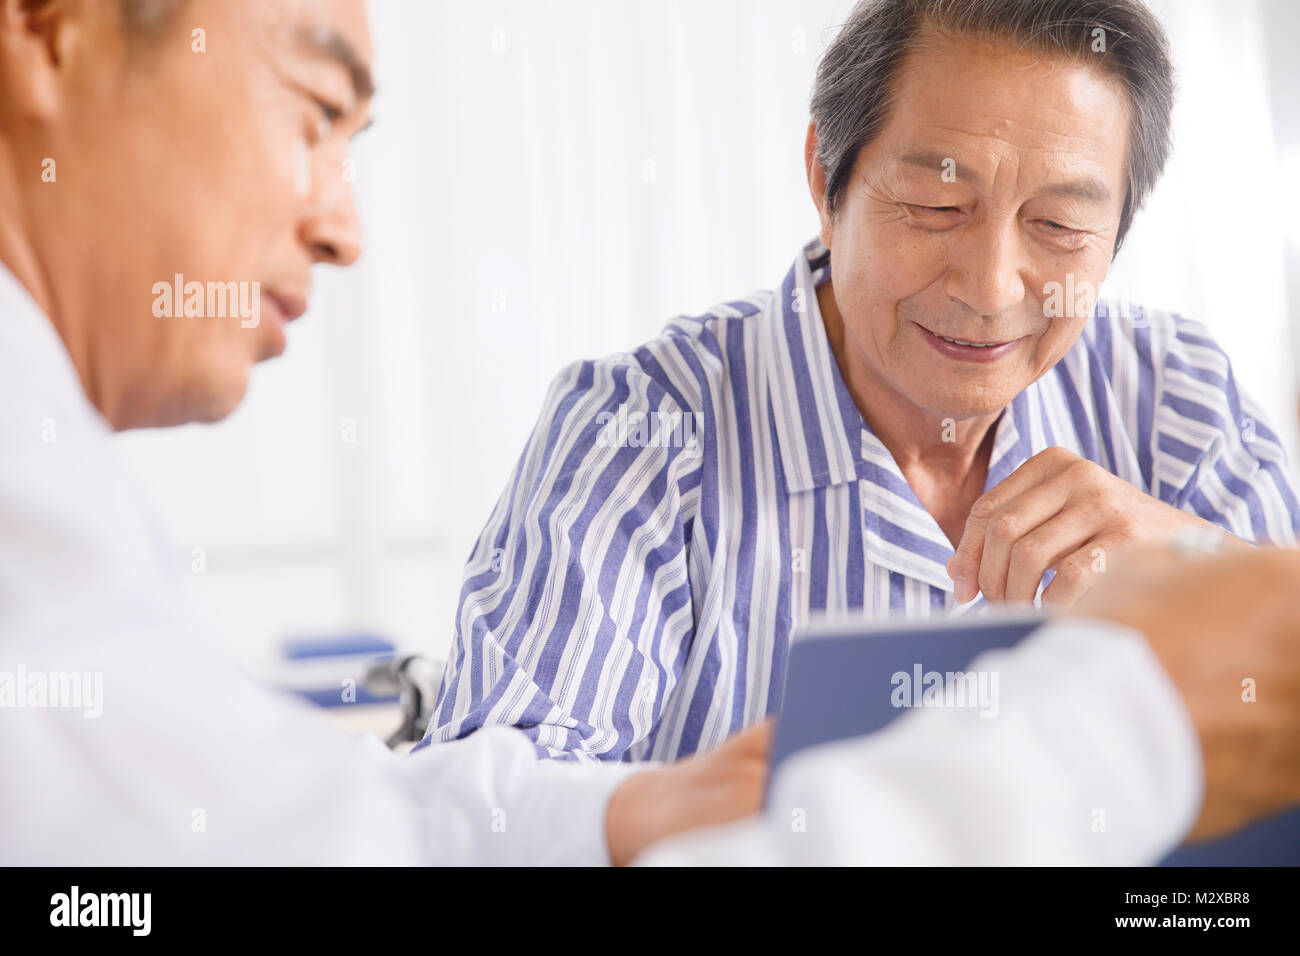 The doctor and the patient communication Stock Photo